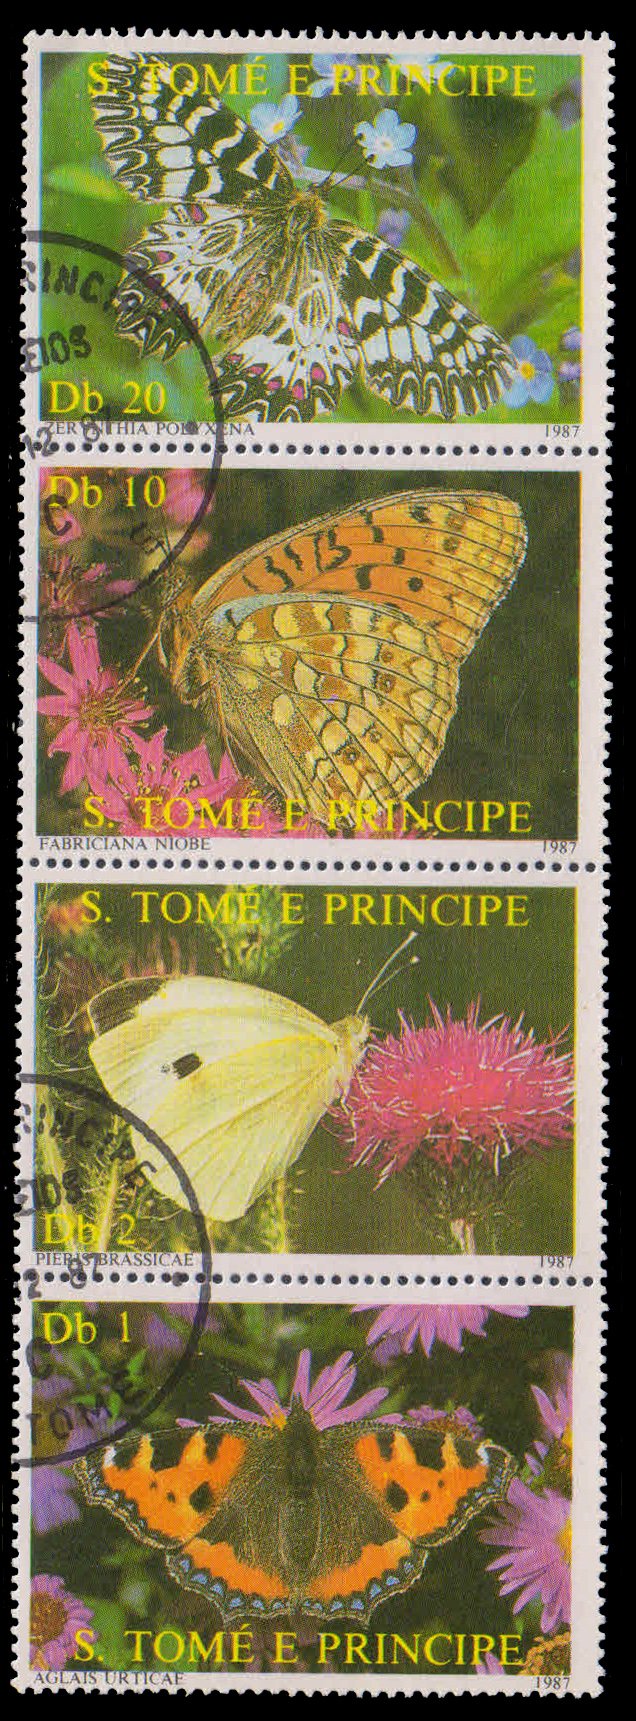 ST. THOMAS & PRINCE ISLANDS 1987-Butterfly-Flora & Fauna, Used Set of 4, Scott No. A 115C